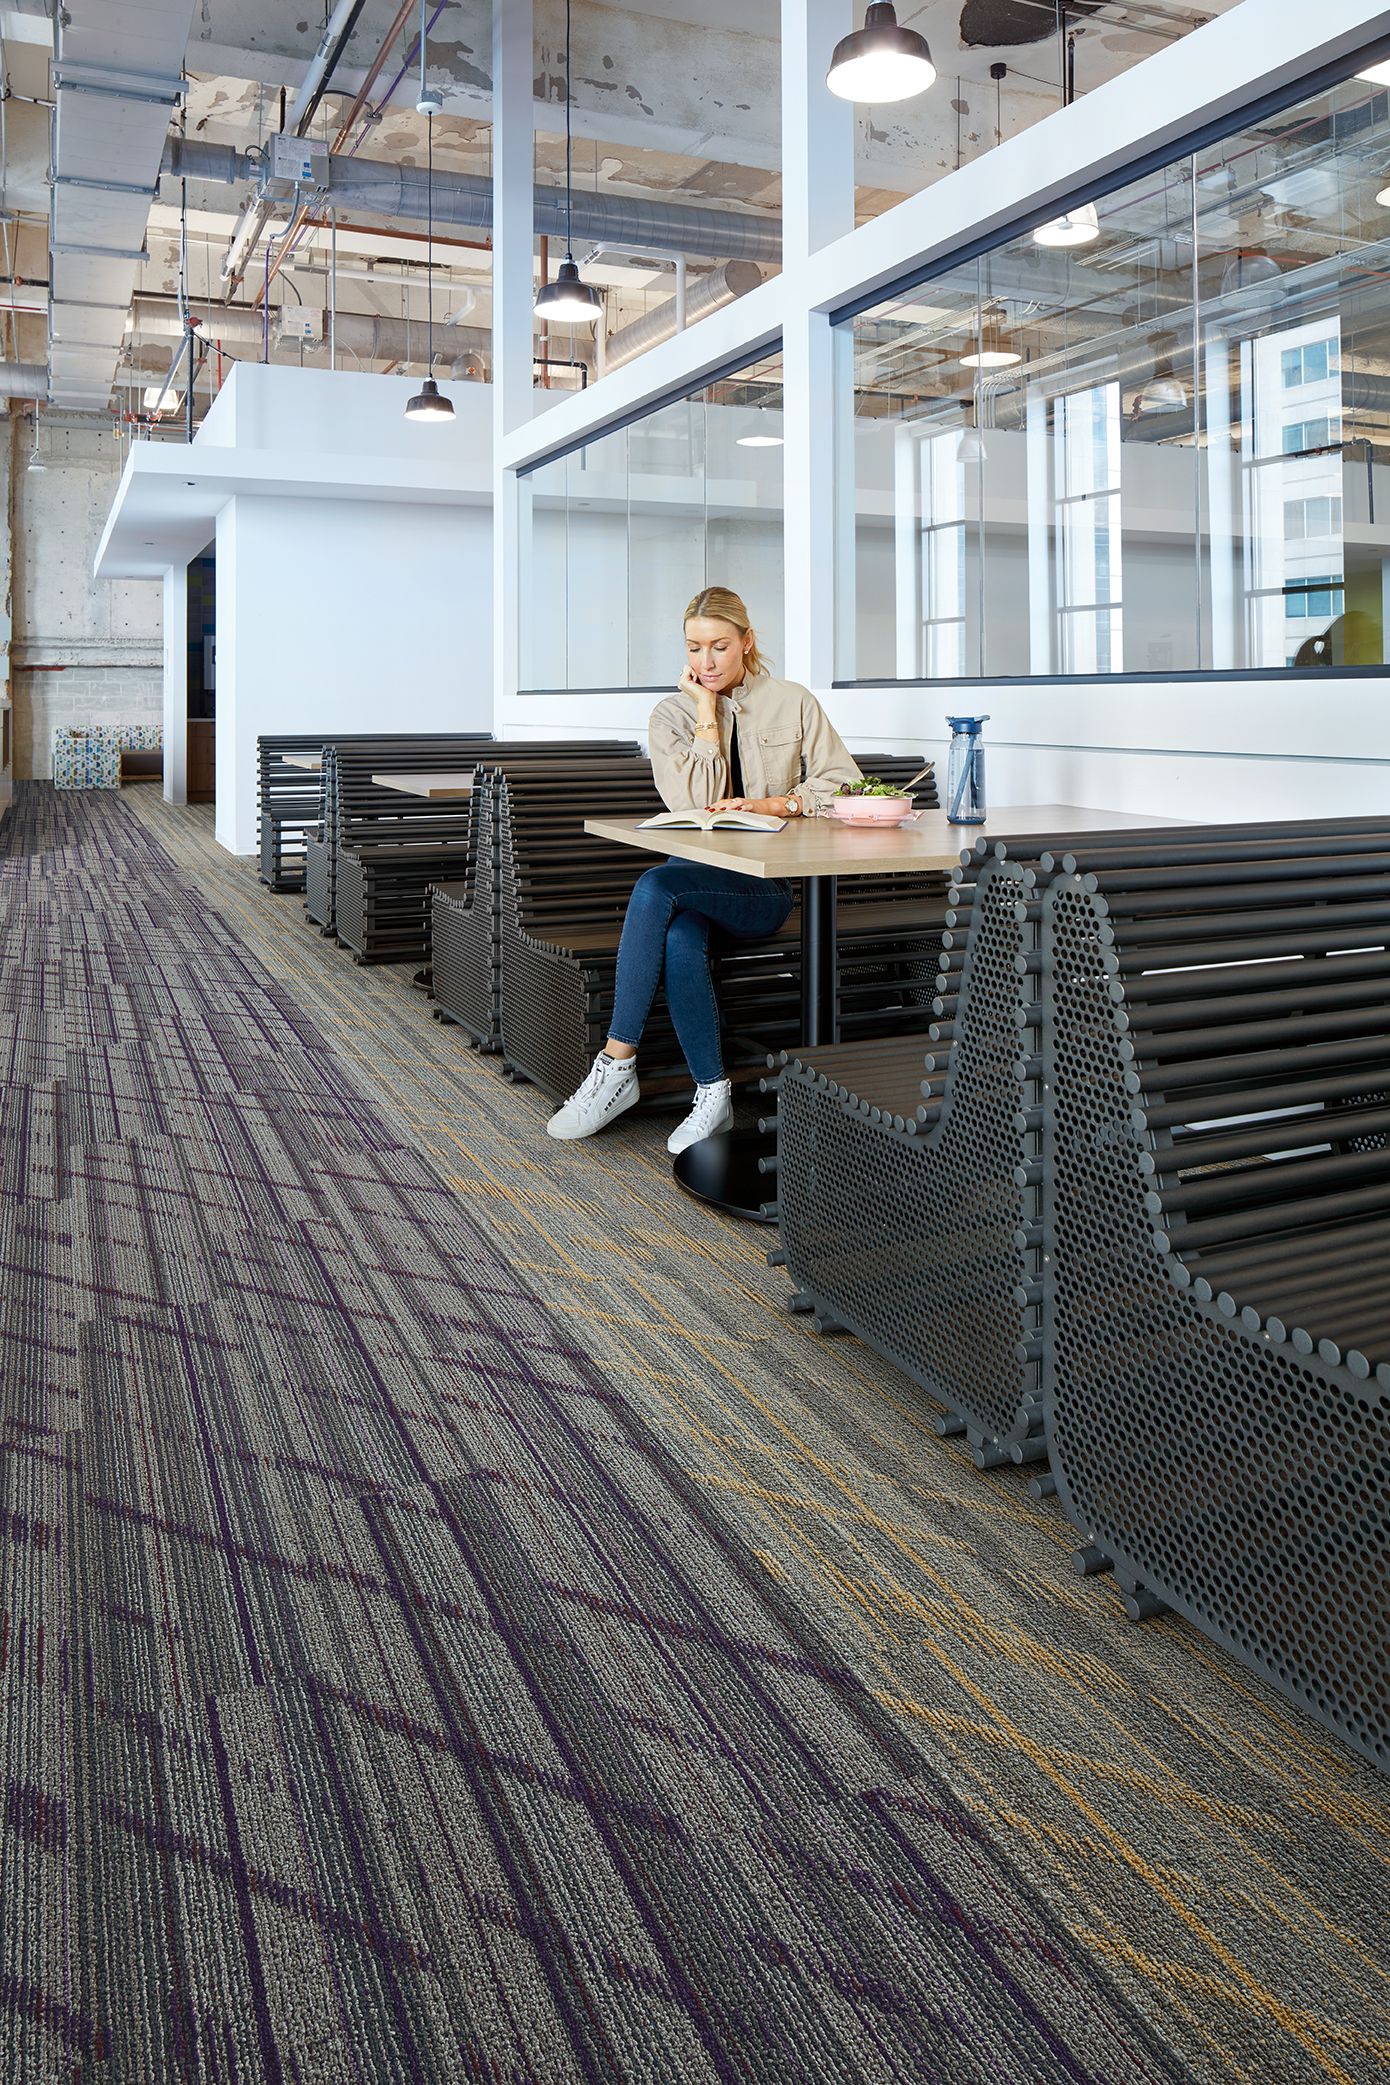 Interface Luminescent plank carpet tile in cafe area with woman seated at table image number 1